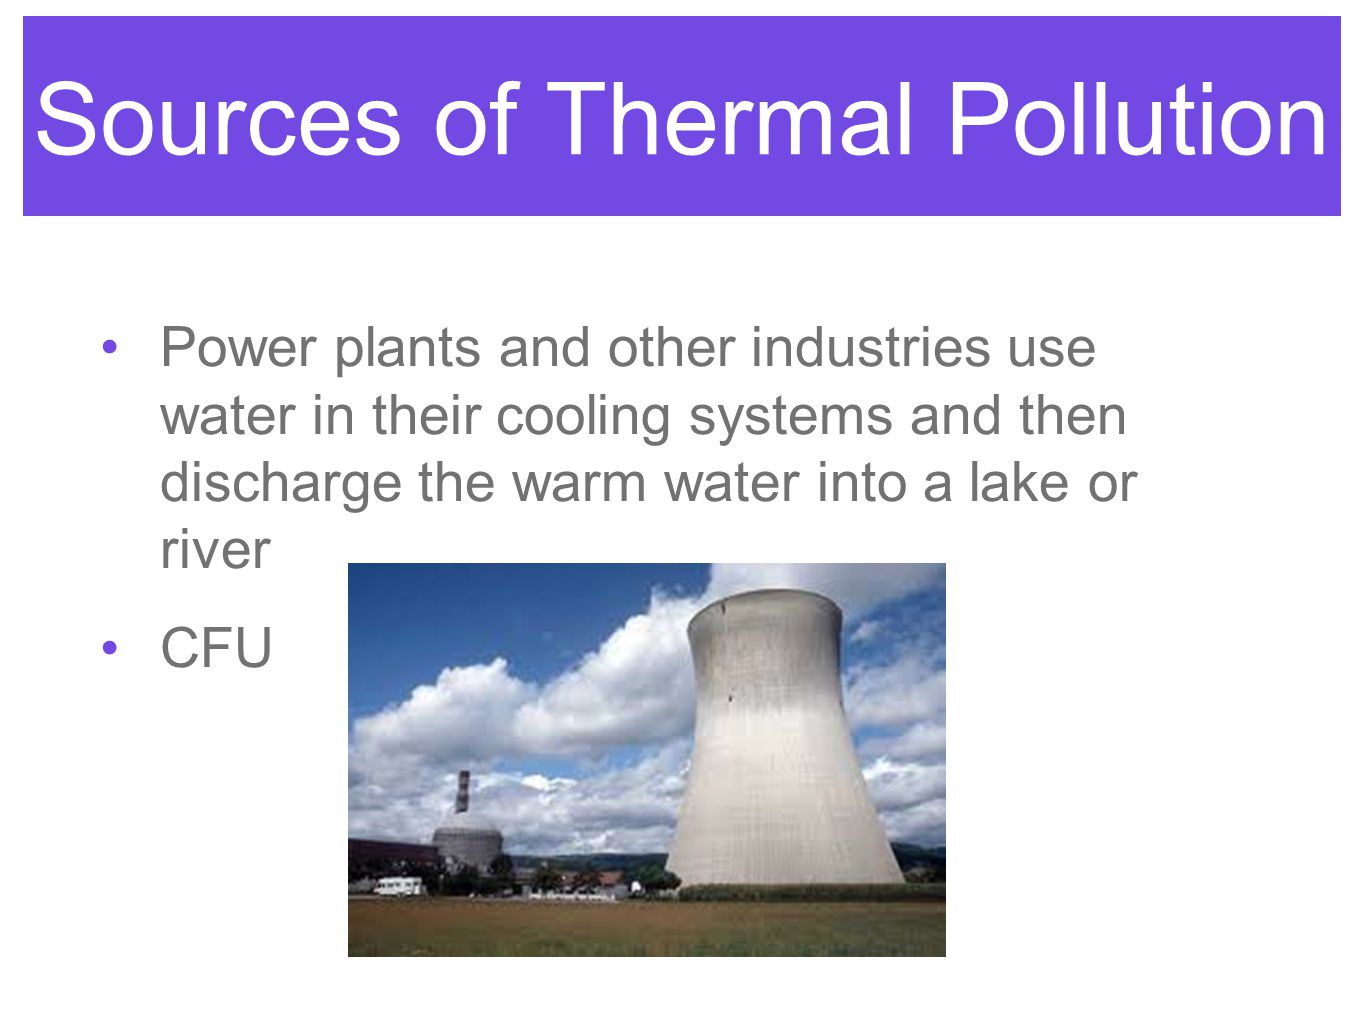 Sources of Thermal Pollution